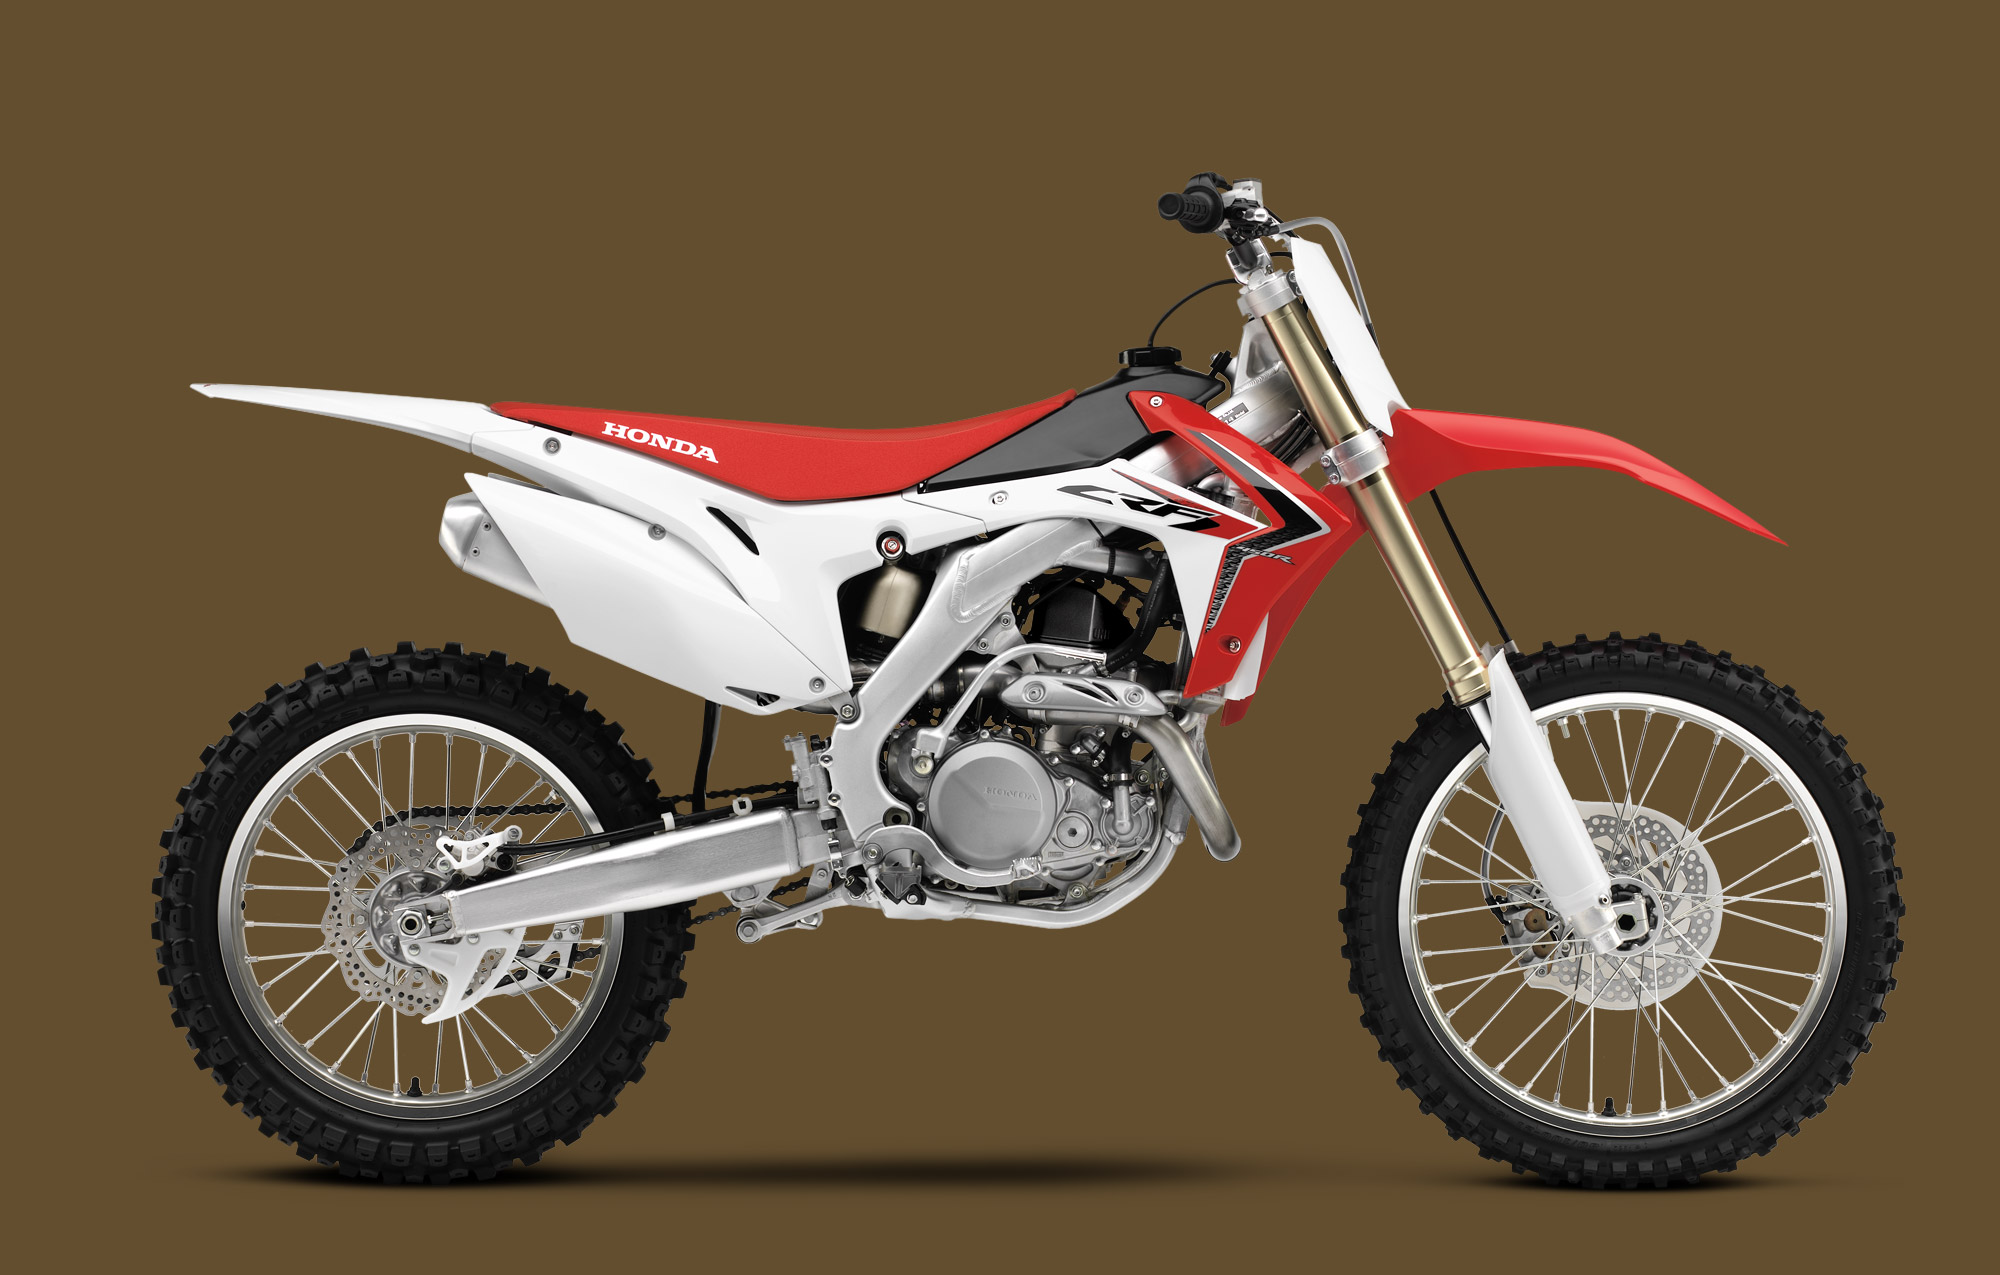 Honda Crf450r Wallpaper And Picture Rally Motocross Racing